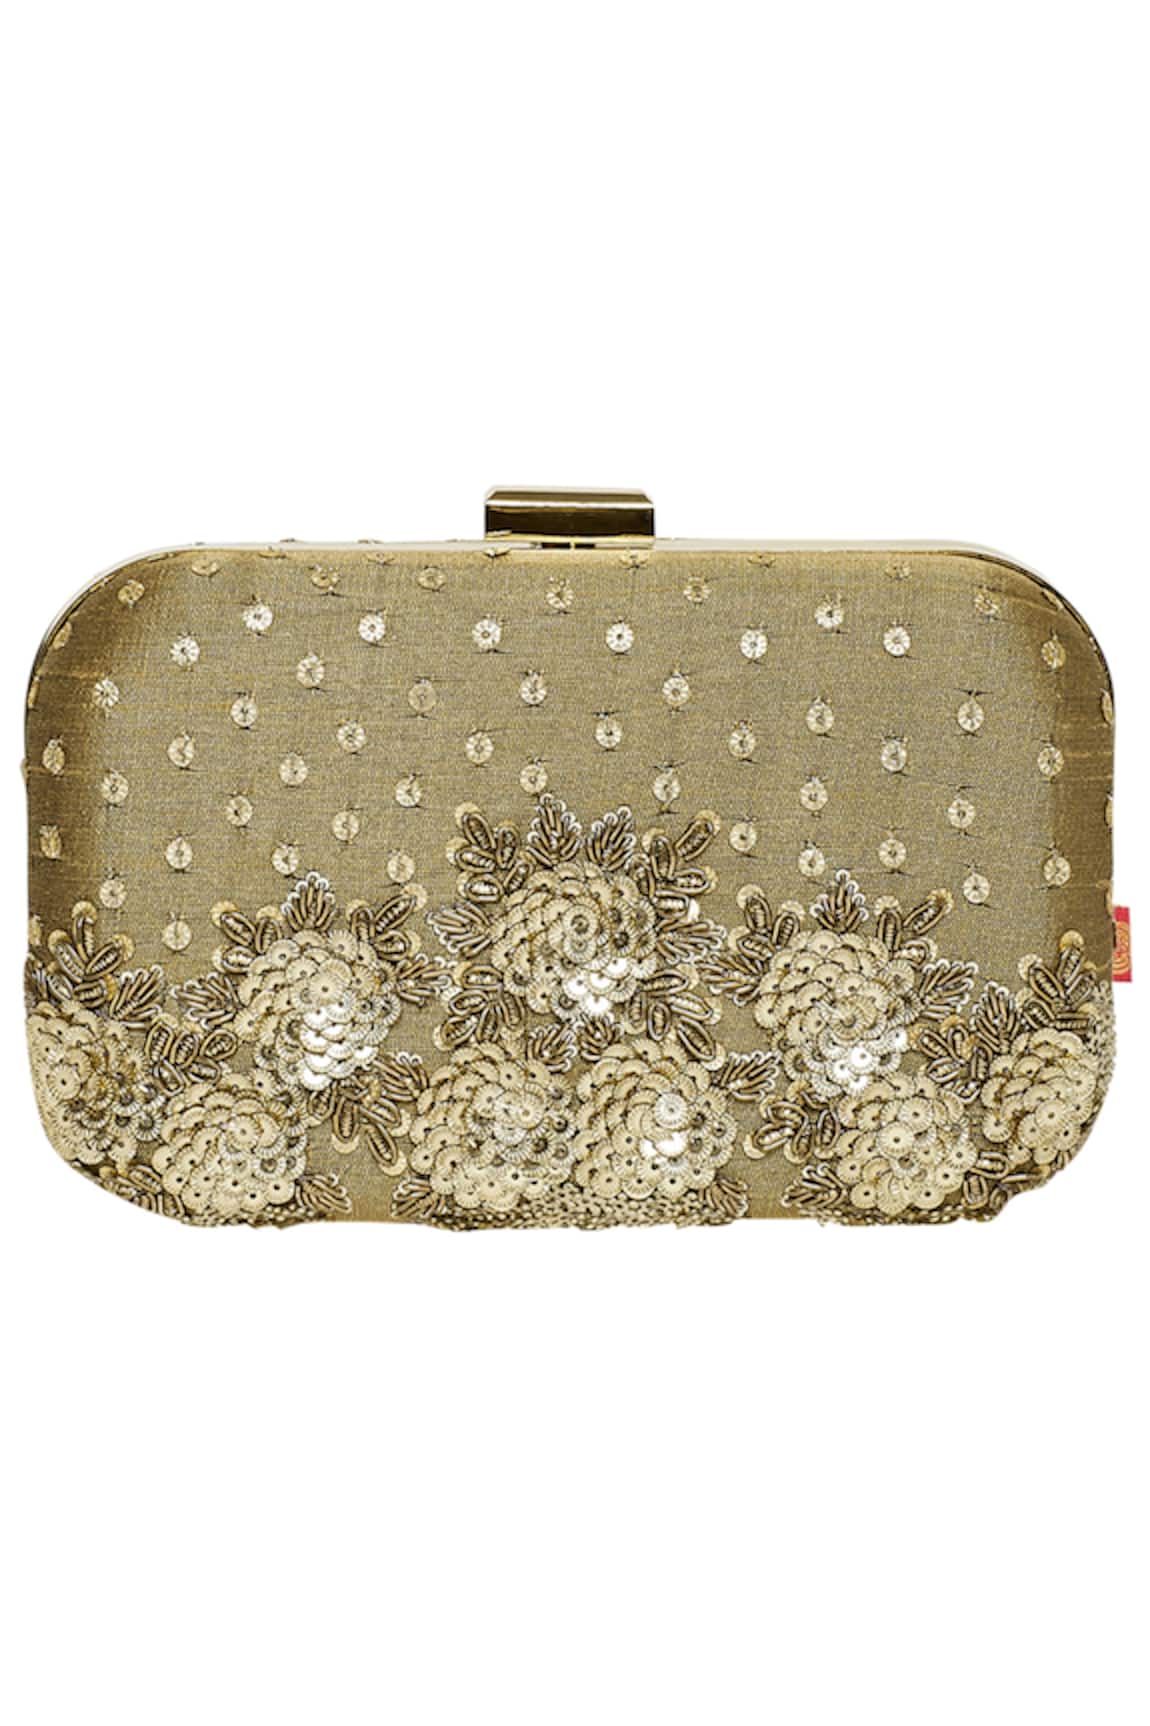 House of Vian Sequin embroidered clutch